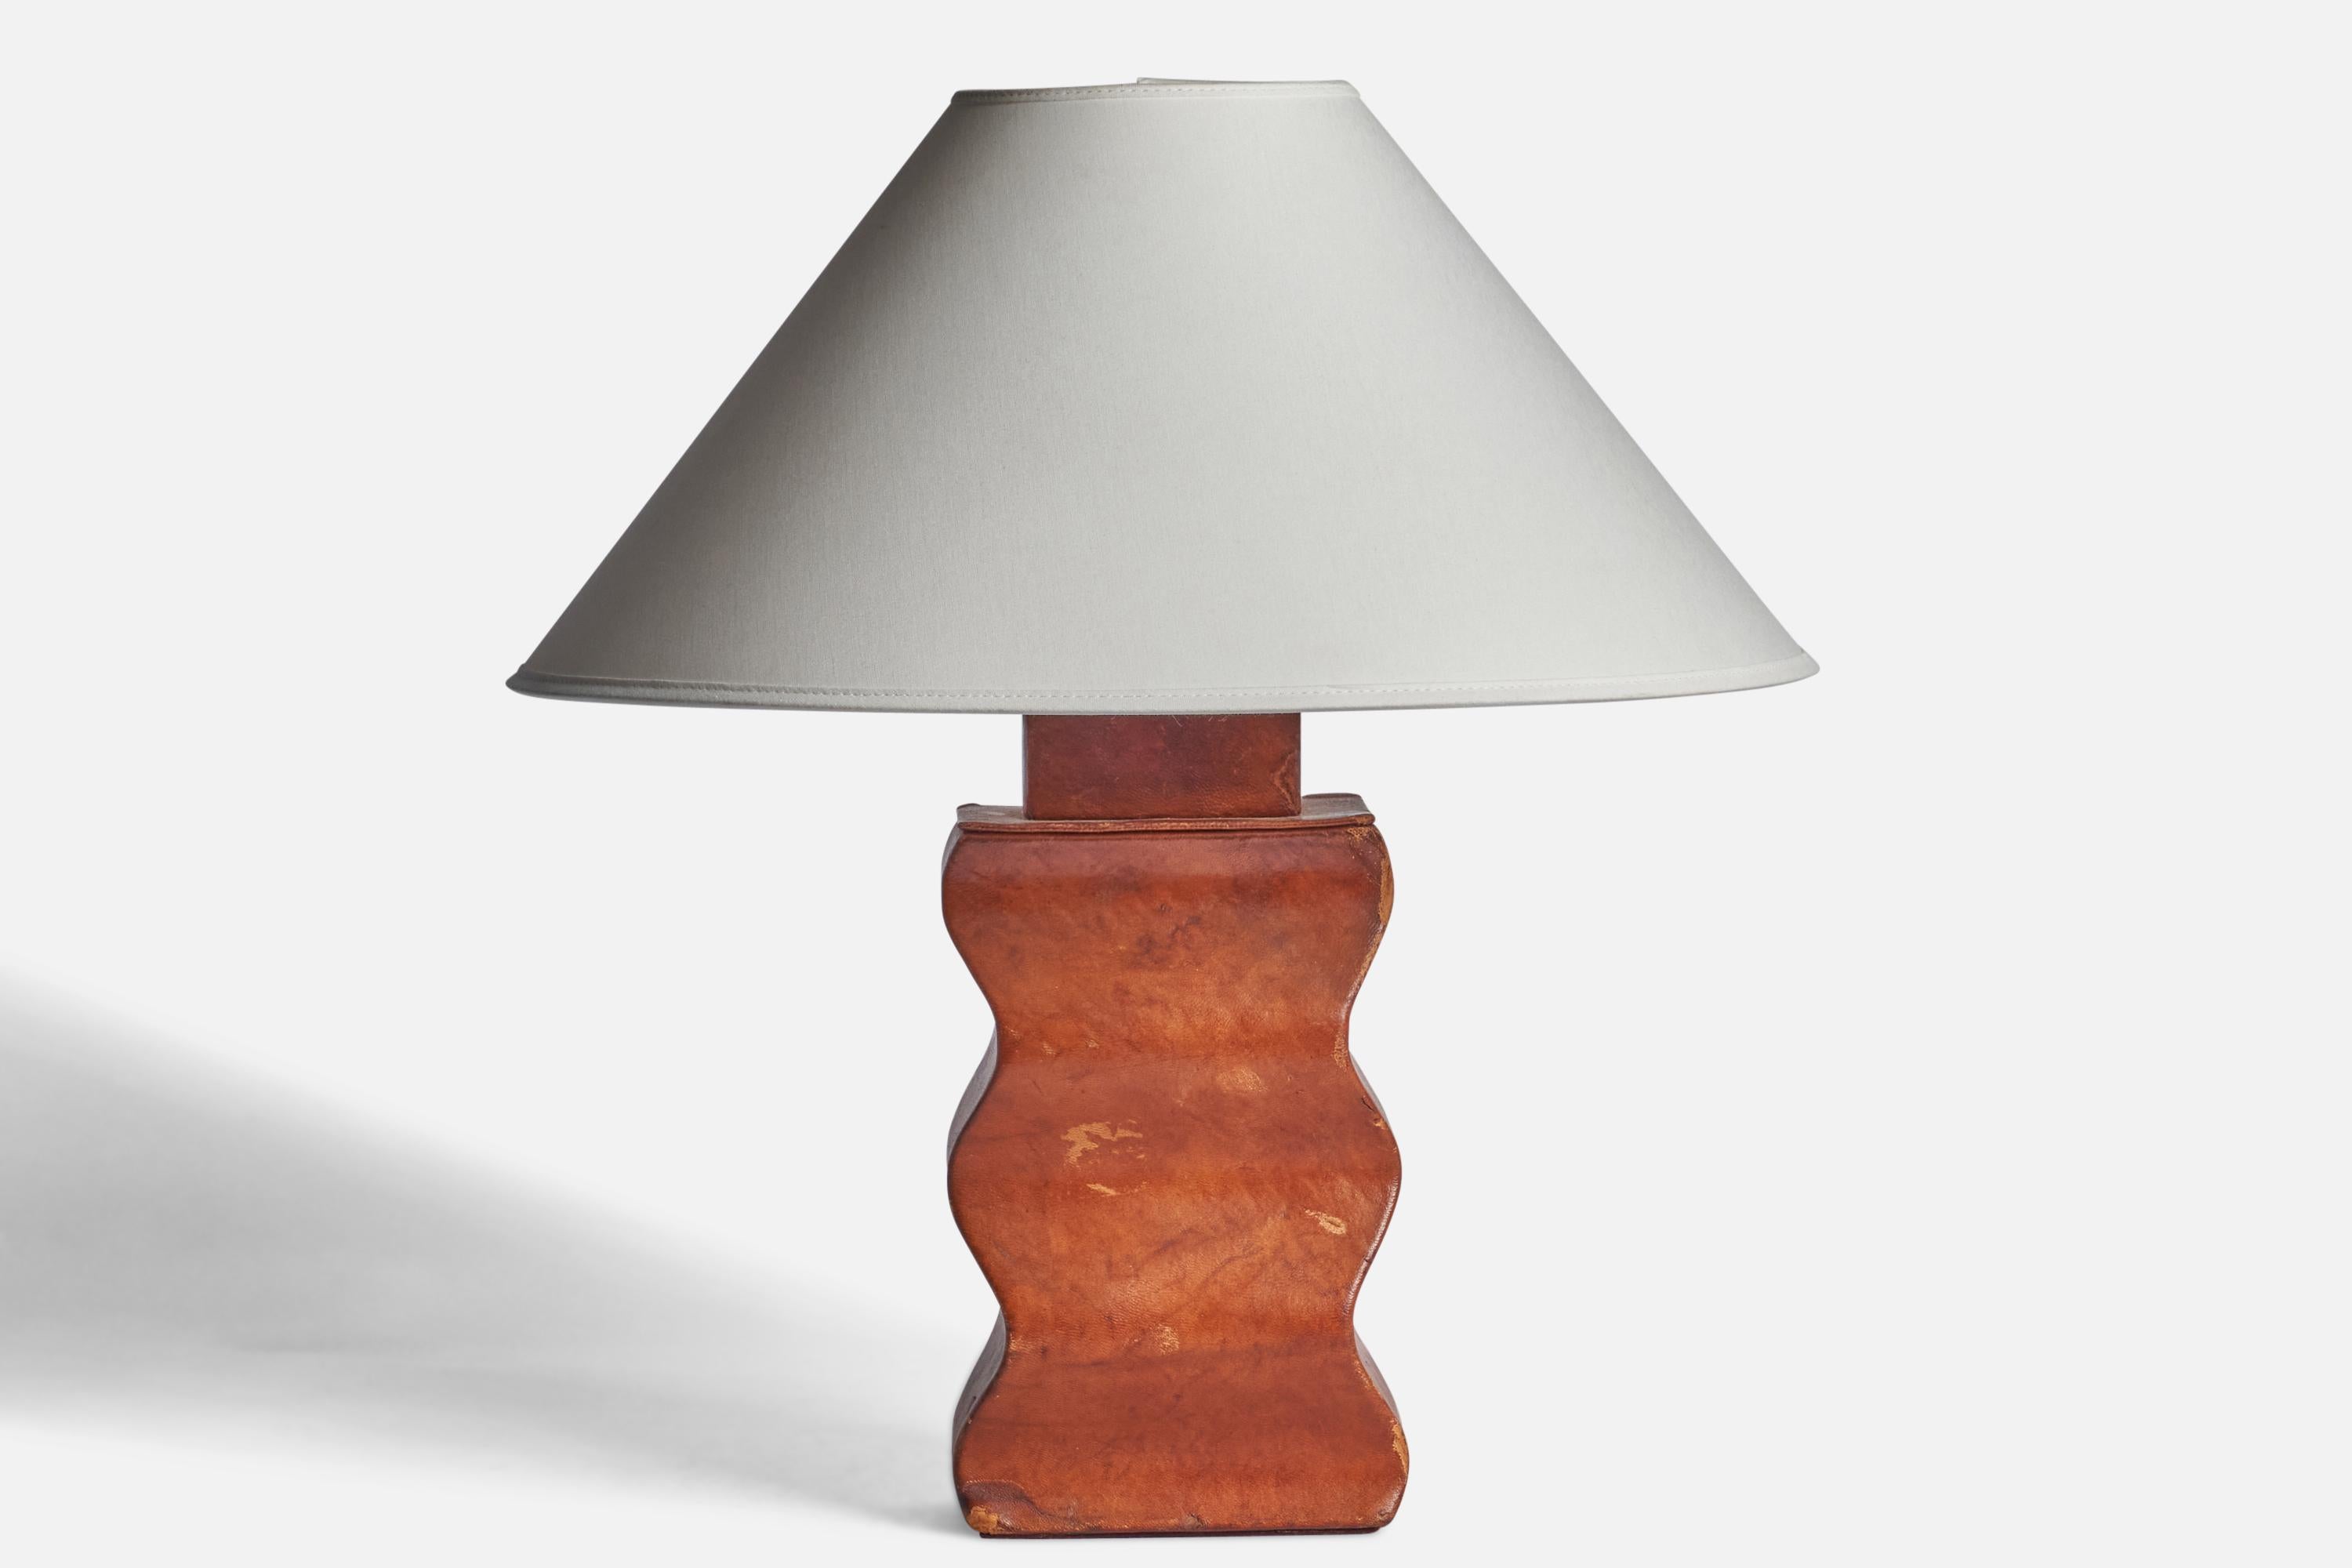 
An organic leather-clad wood table lamp designed and produced in the US, 1940s.
Dimensions of Lamp (inches): 13.15” H x 5.5” W x  4” D
Dimensions of Shade (inches): 4.5” Top Diameter x 16” Bottom Diameter x 7.25” H
Dimensions of Lamp with Shade